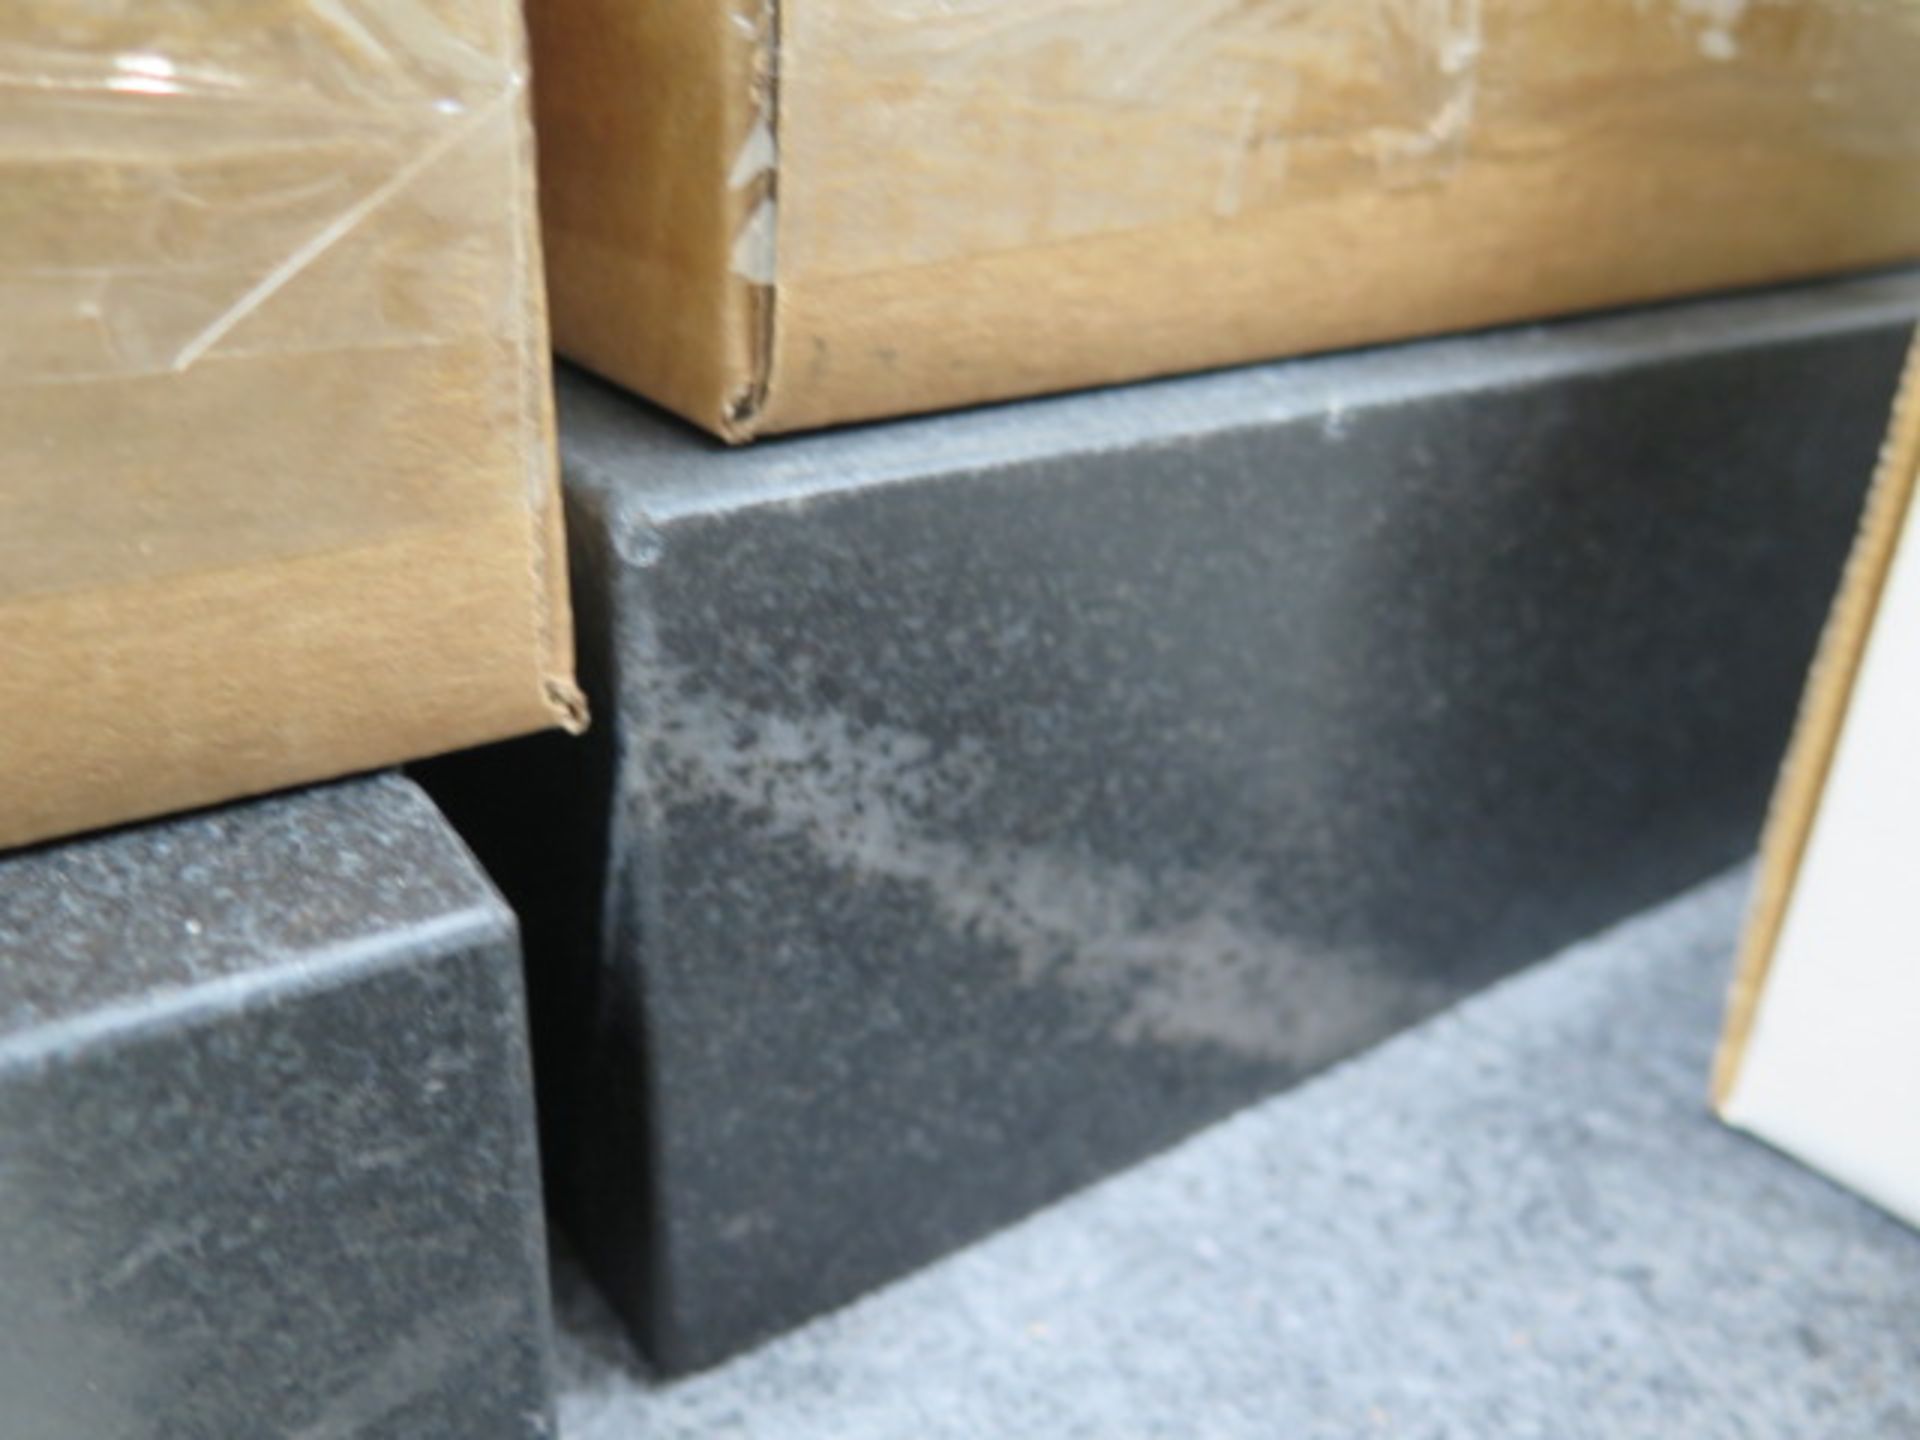 12" x 18' x 3" and 12" x 18" x 3 3/4" Granite Surface Plates (2) (SOLD AS-IS - NO WARRANTY) - Image 2 of 3